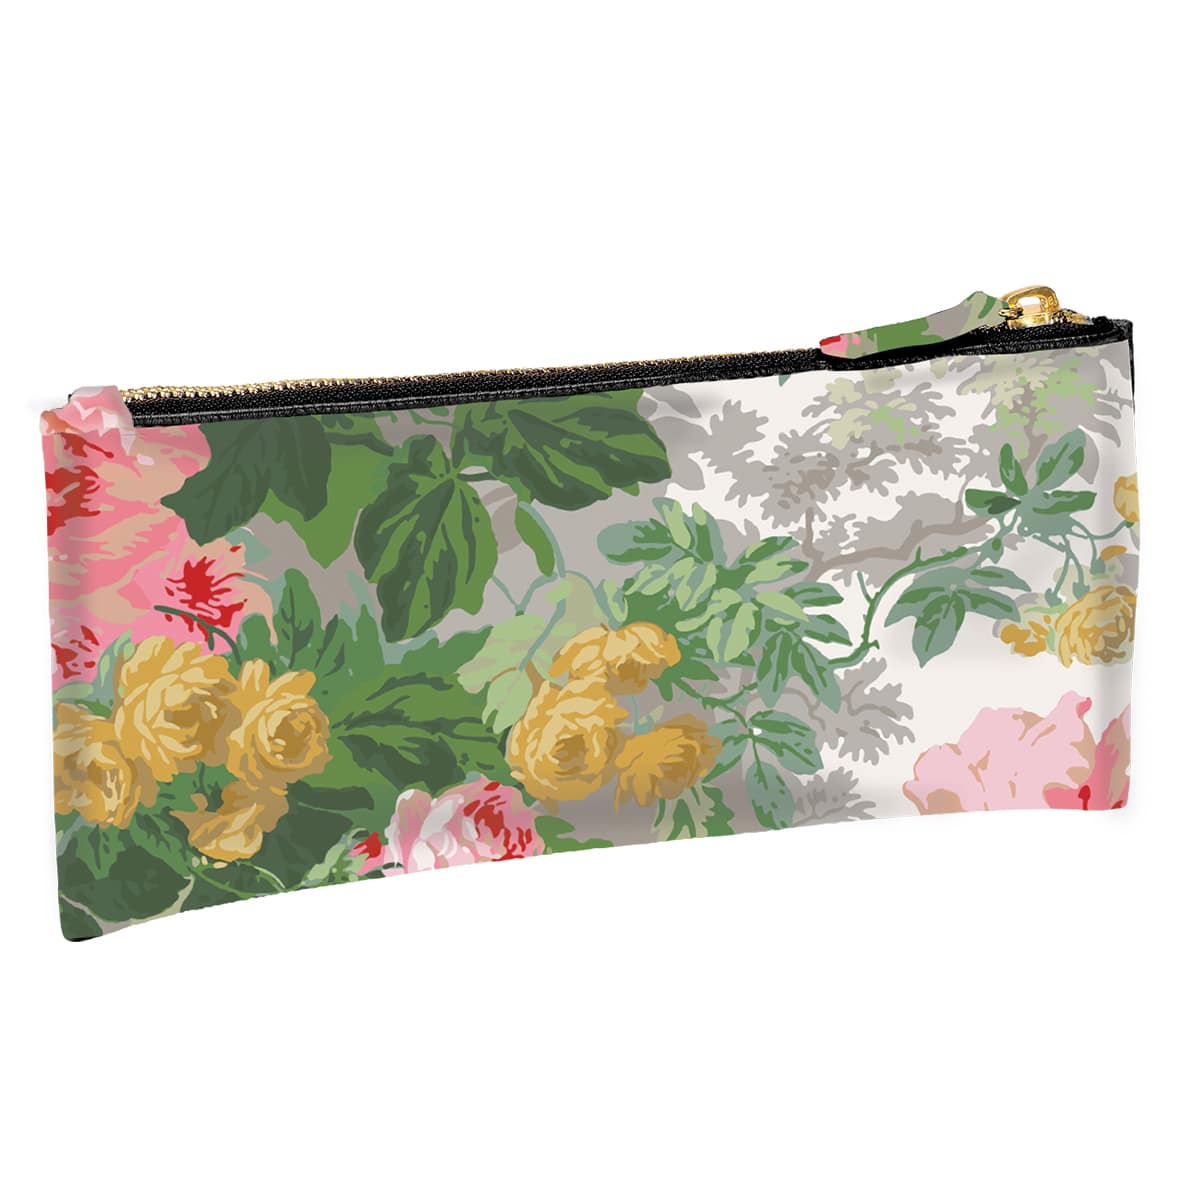 A Virginia Pencil Case with a floral pattern.